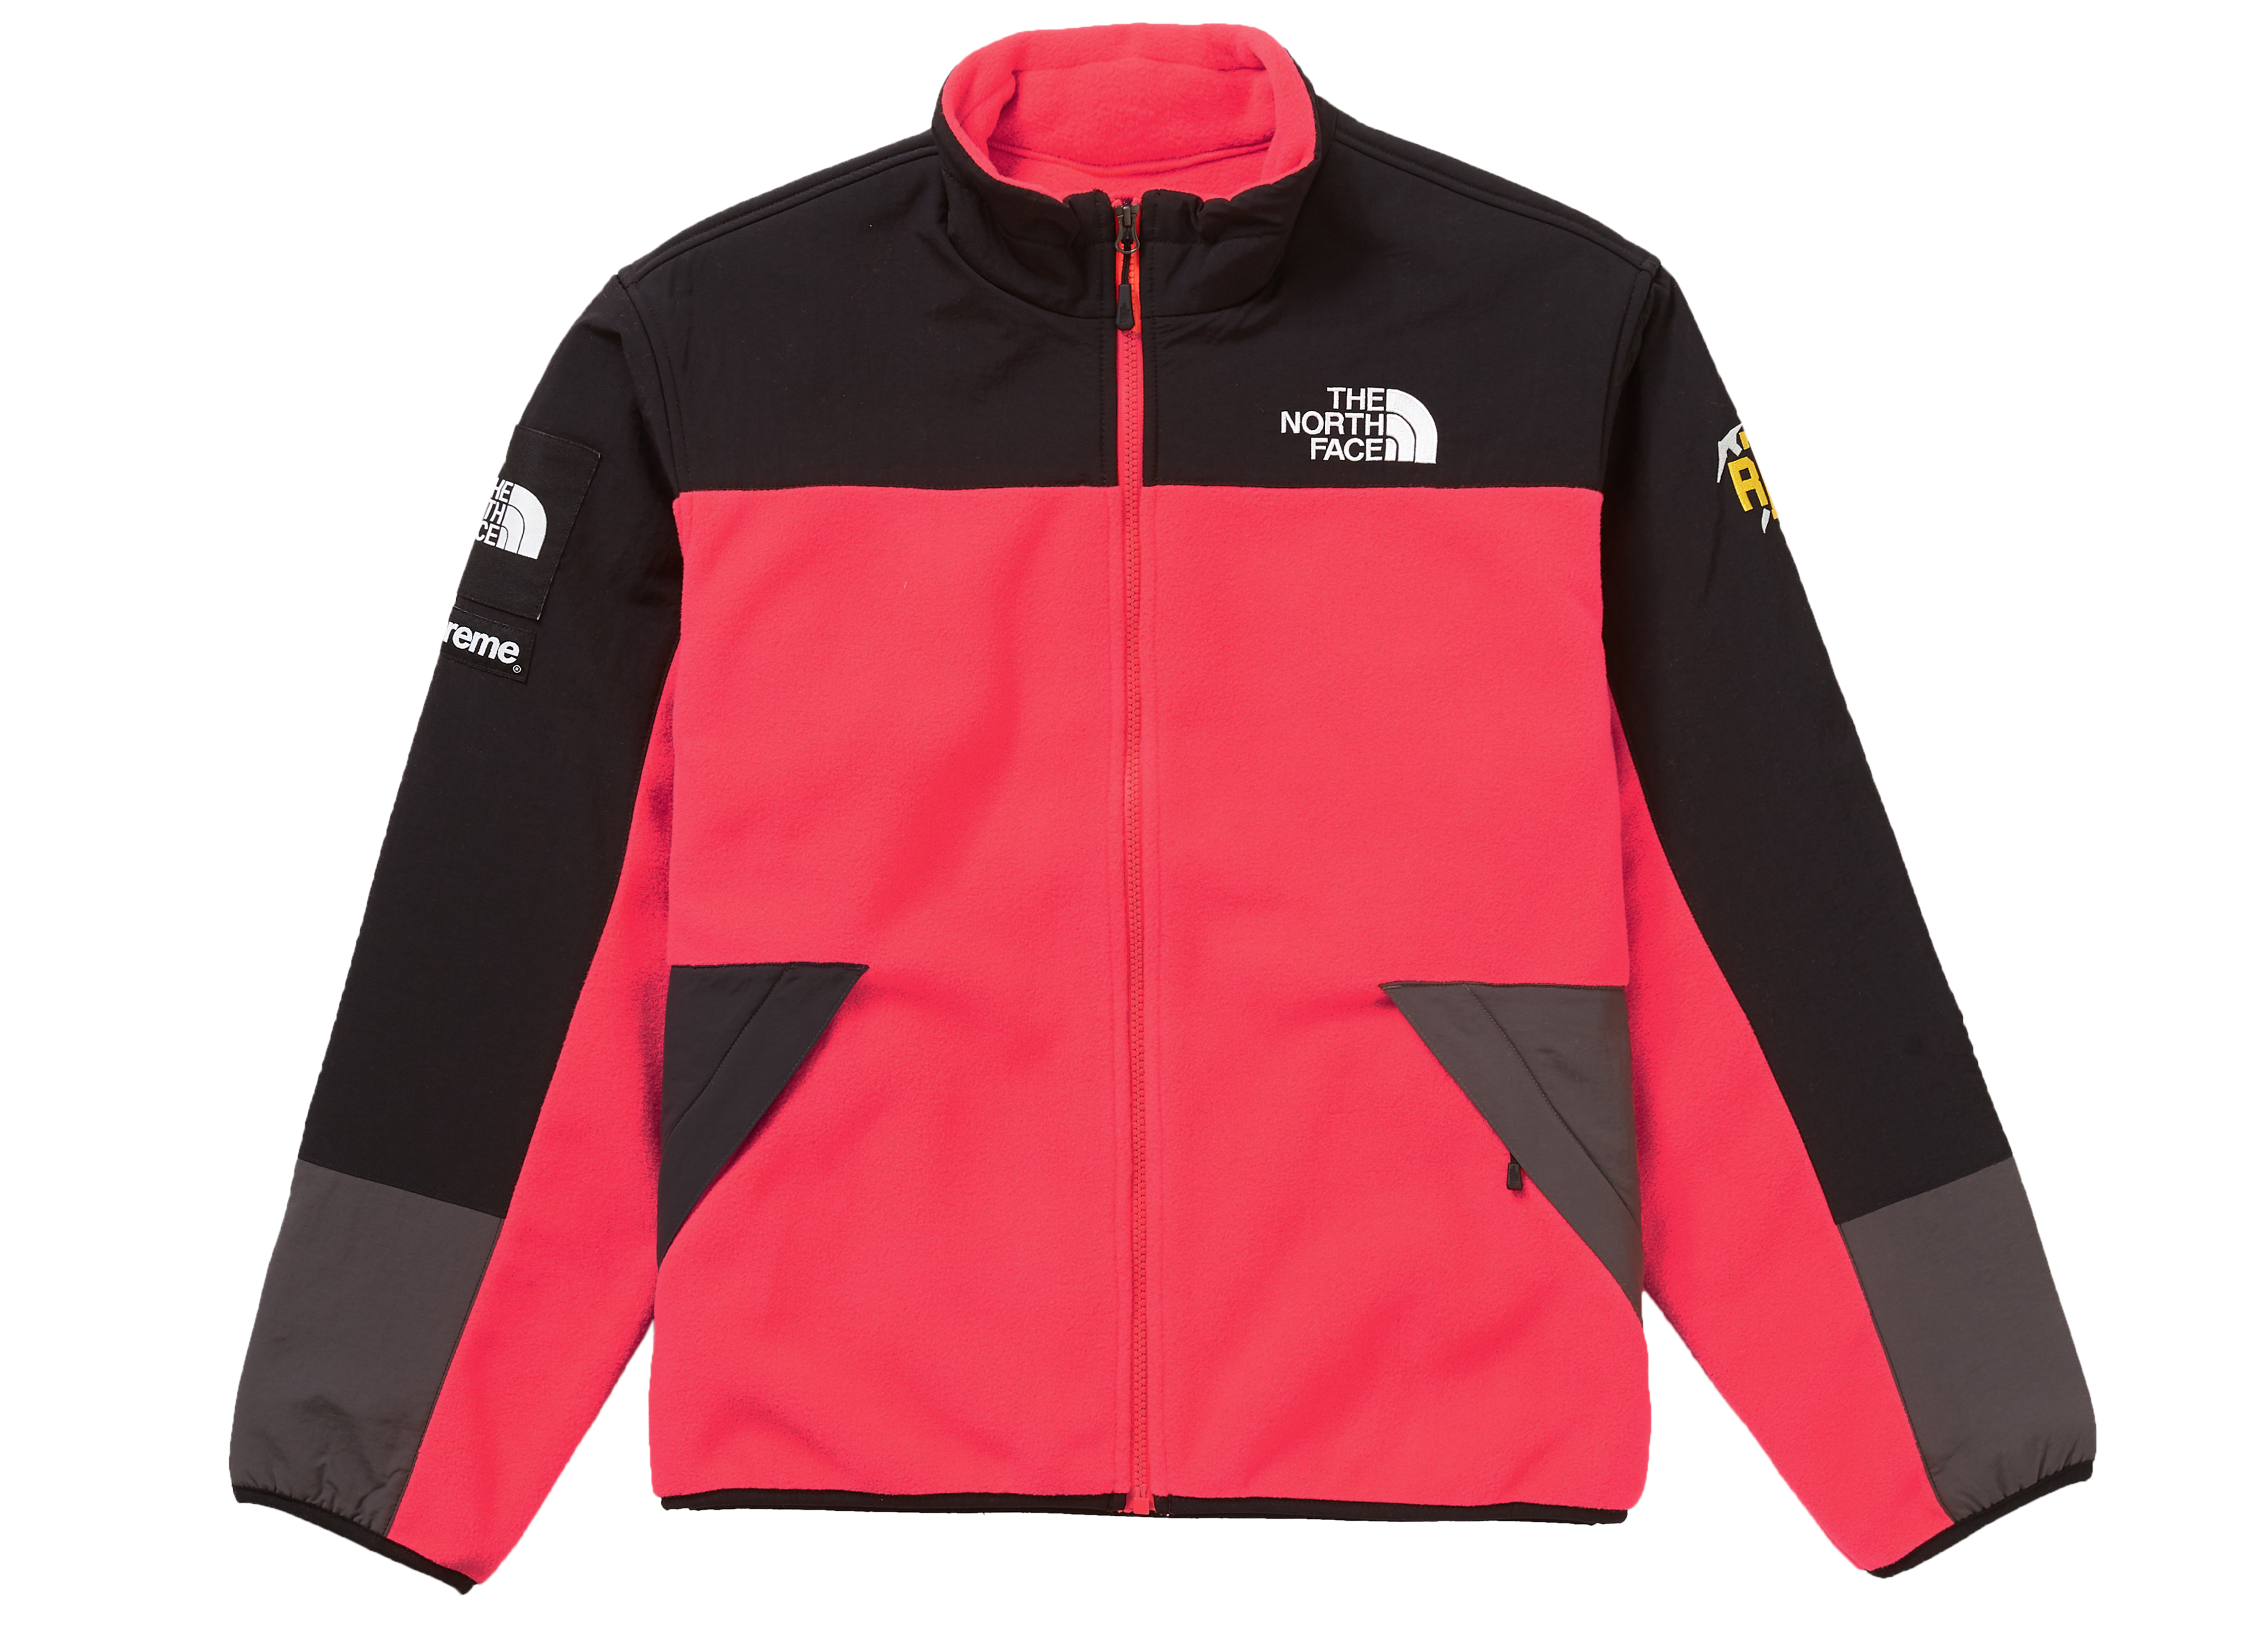 Supreme The North Face RTG Fleece Jacket Bright Red - SS20 Men's - US